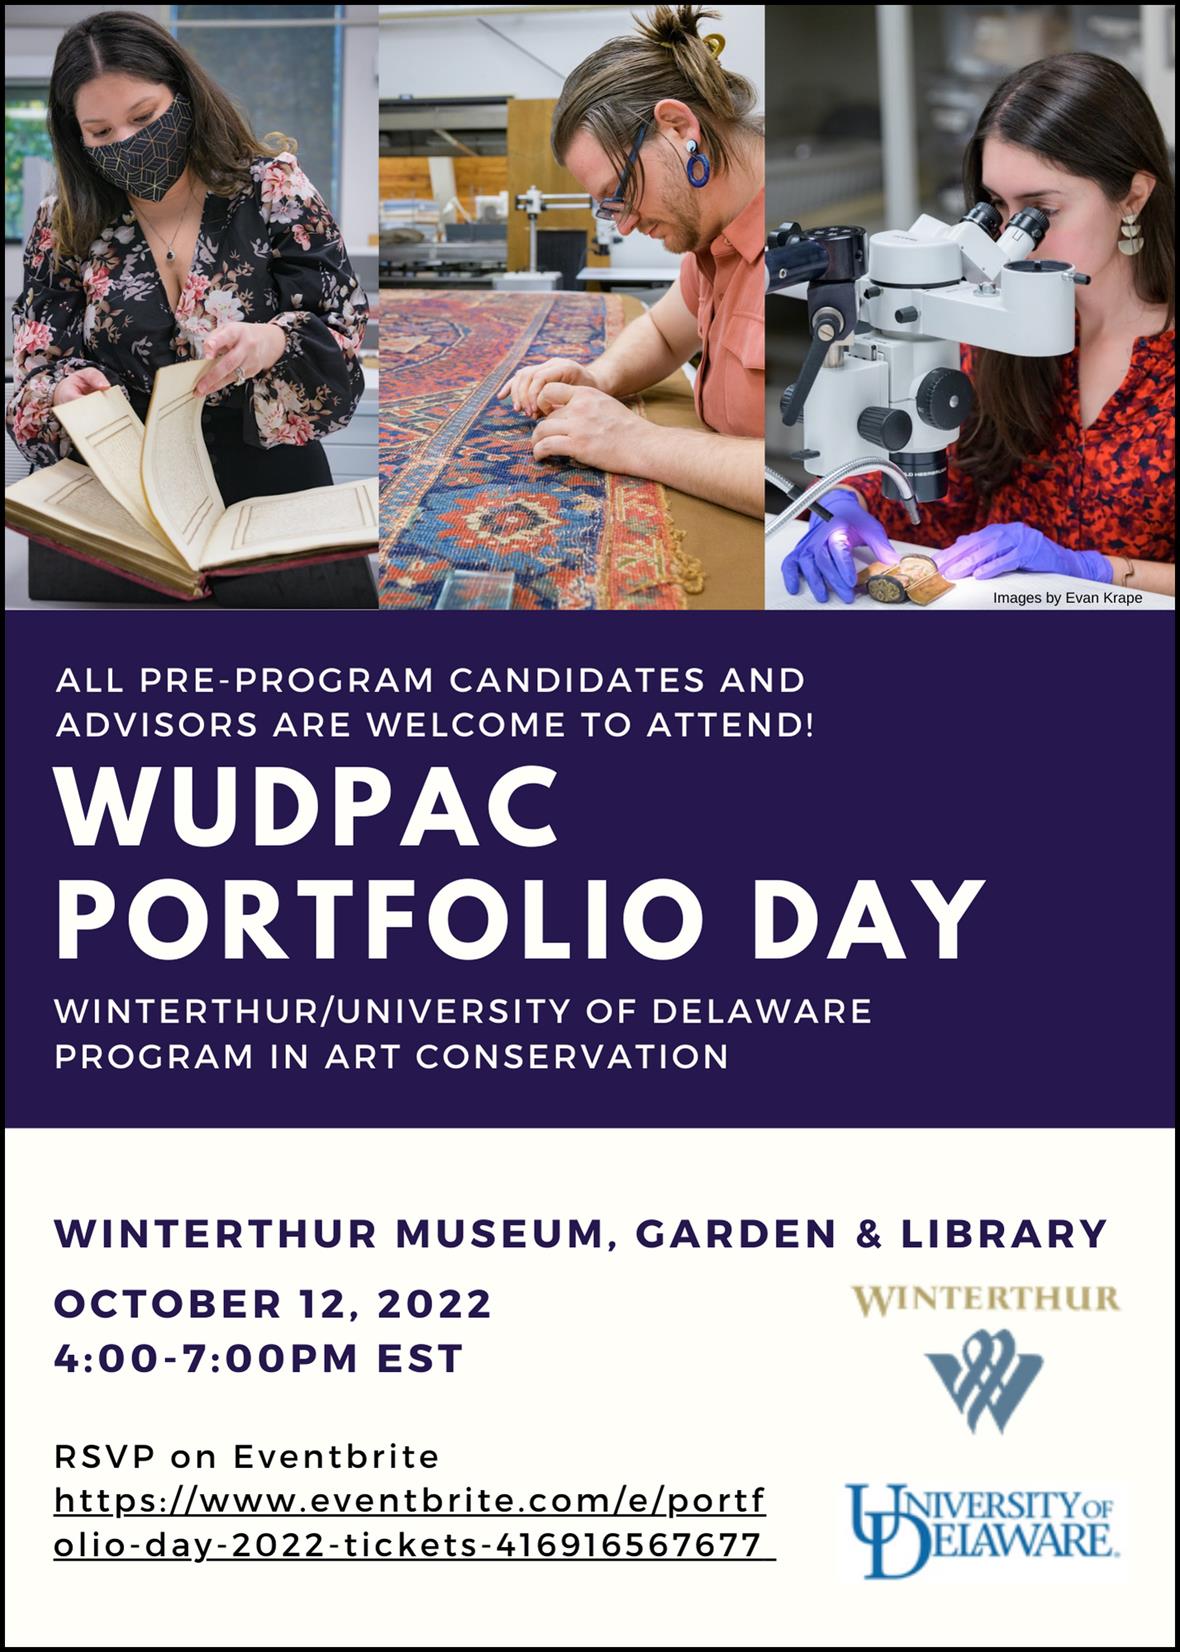 A flyer for the portfolio day event includes images of three students working on conservation projects.